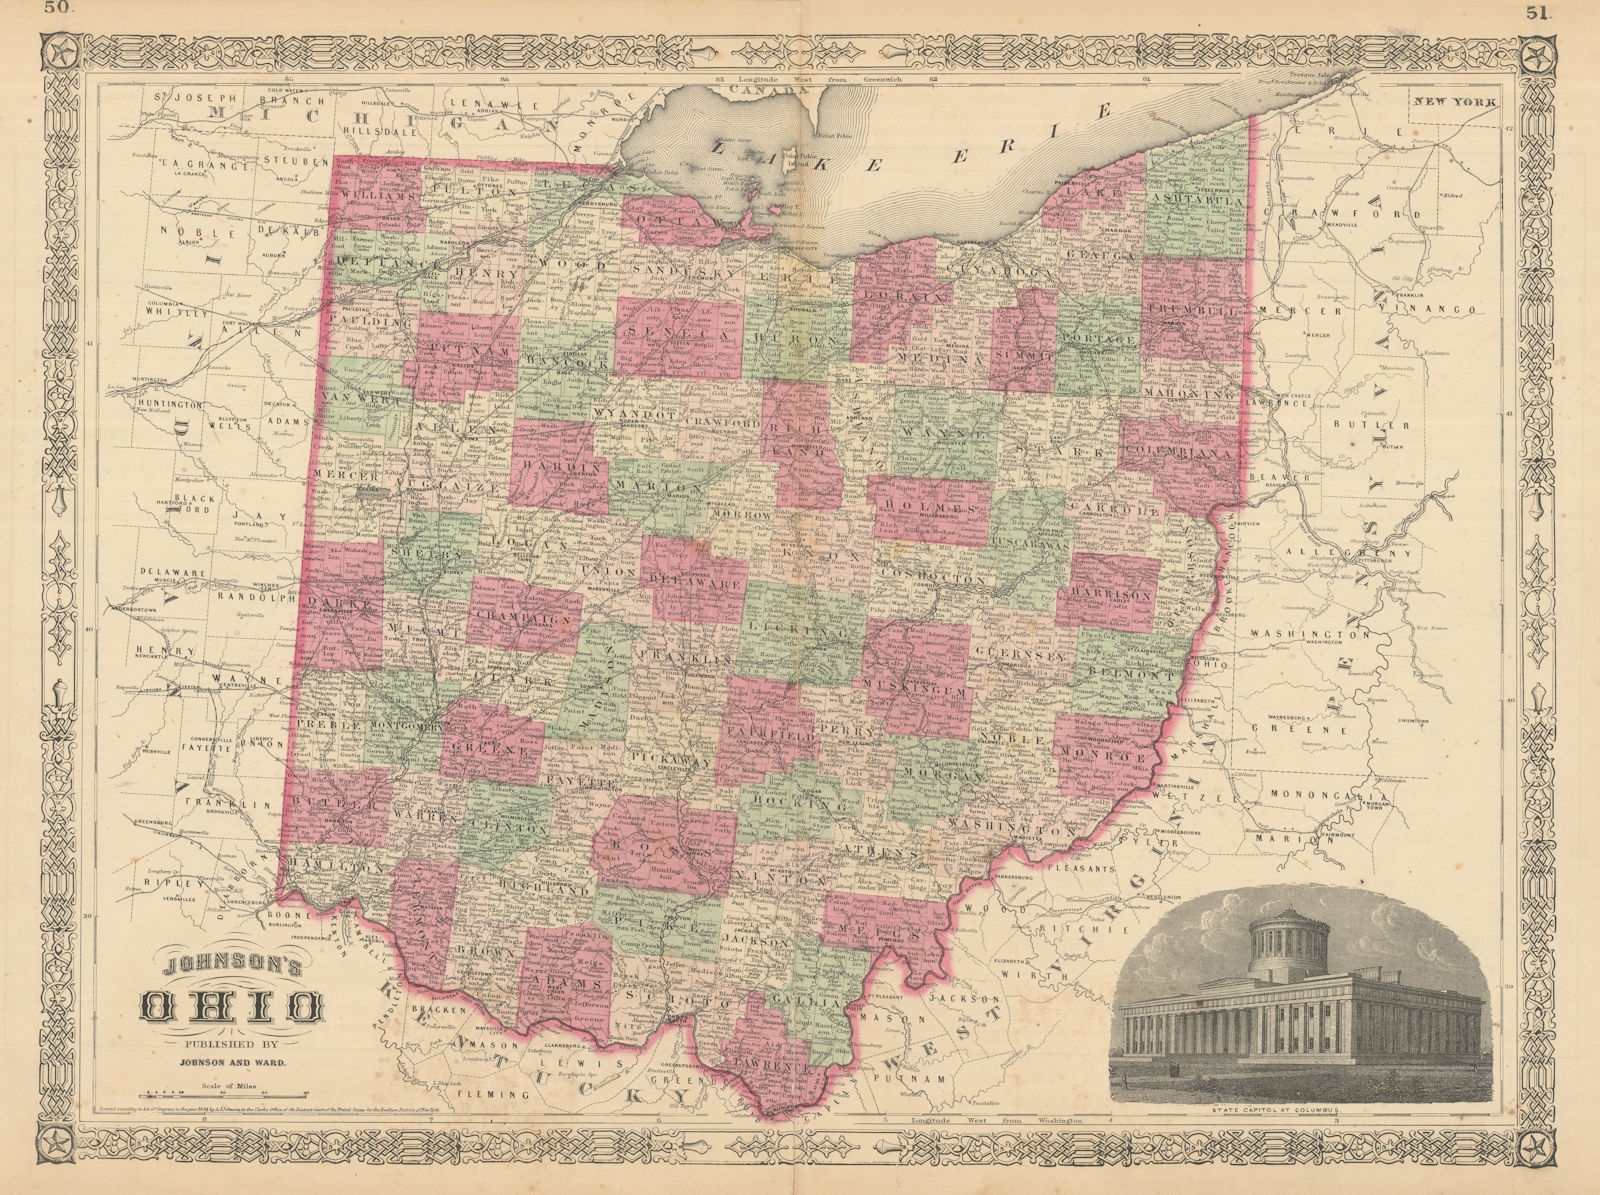 Johnson's Ohio. US state map showing counties 1866 old antique plan chart